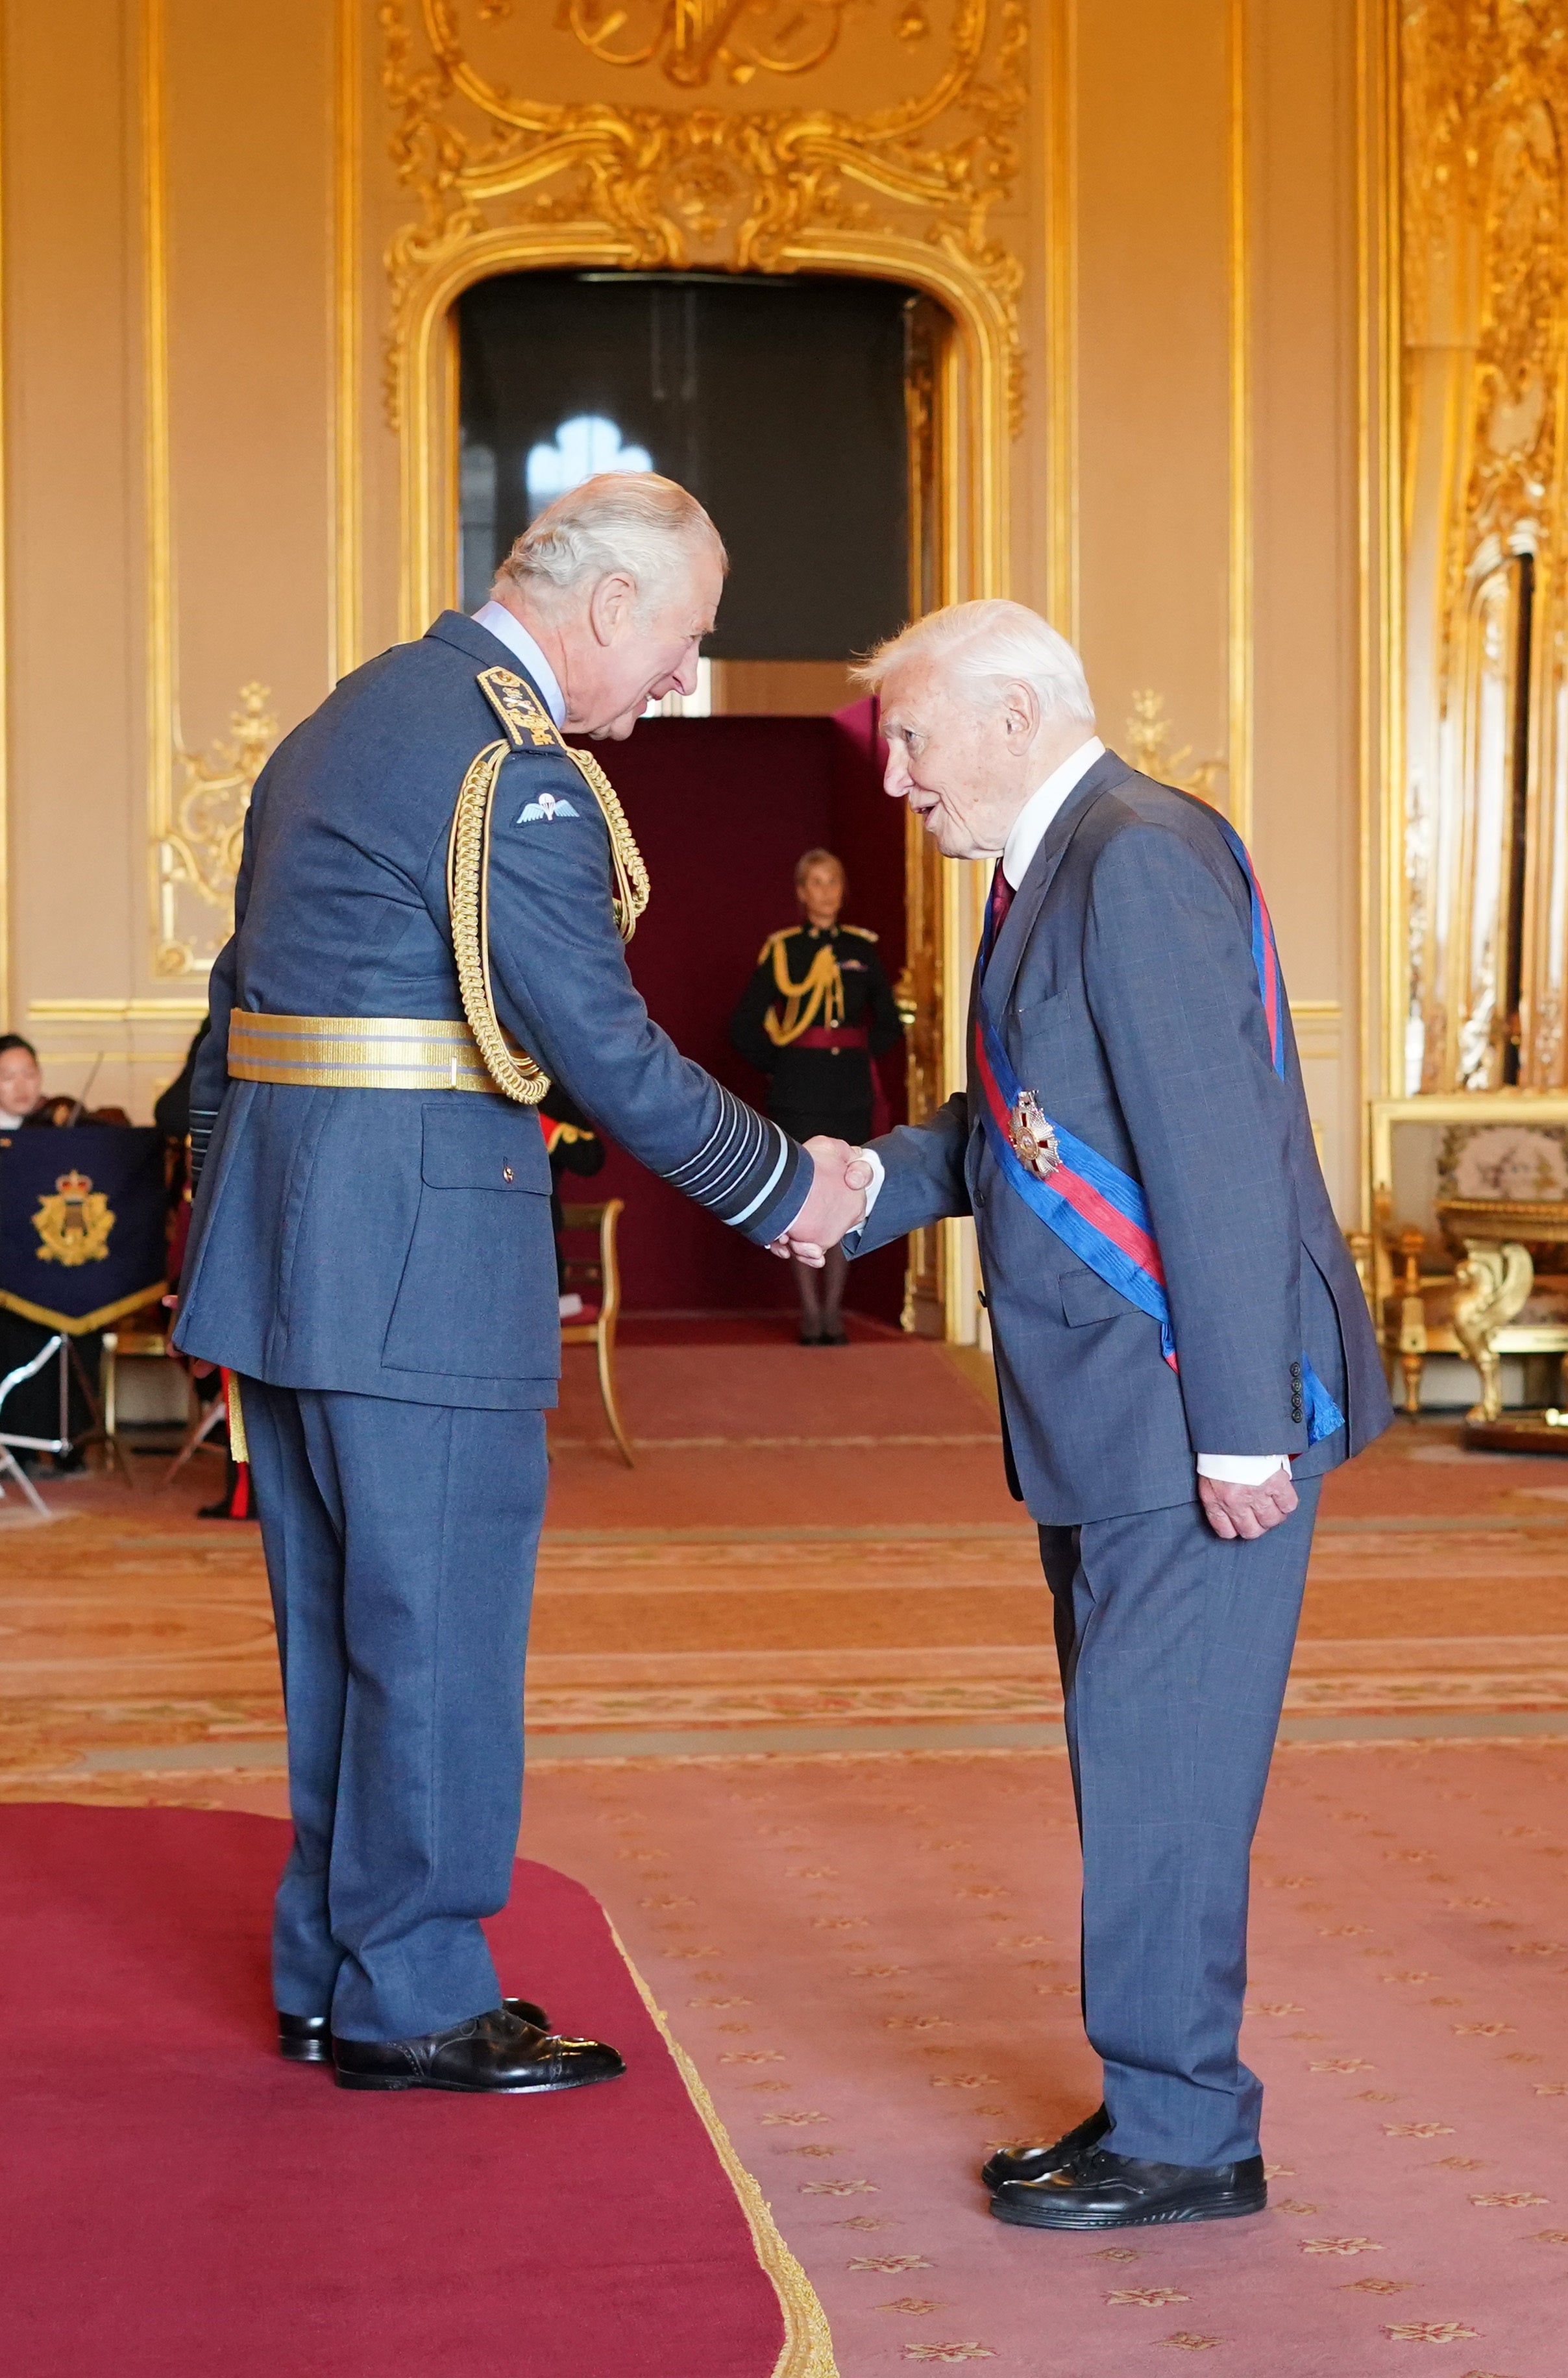 The broadcaster collects his honour from Prince Charles at an investiture ceremony at Windsor Castle on Wednesday